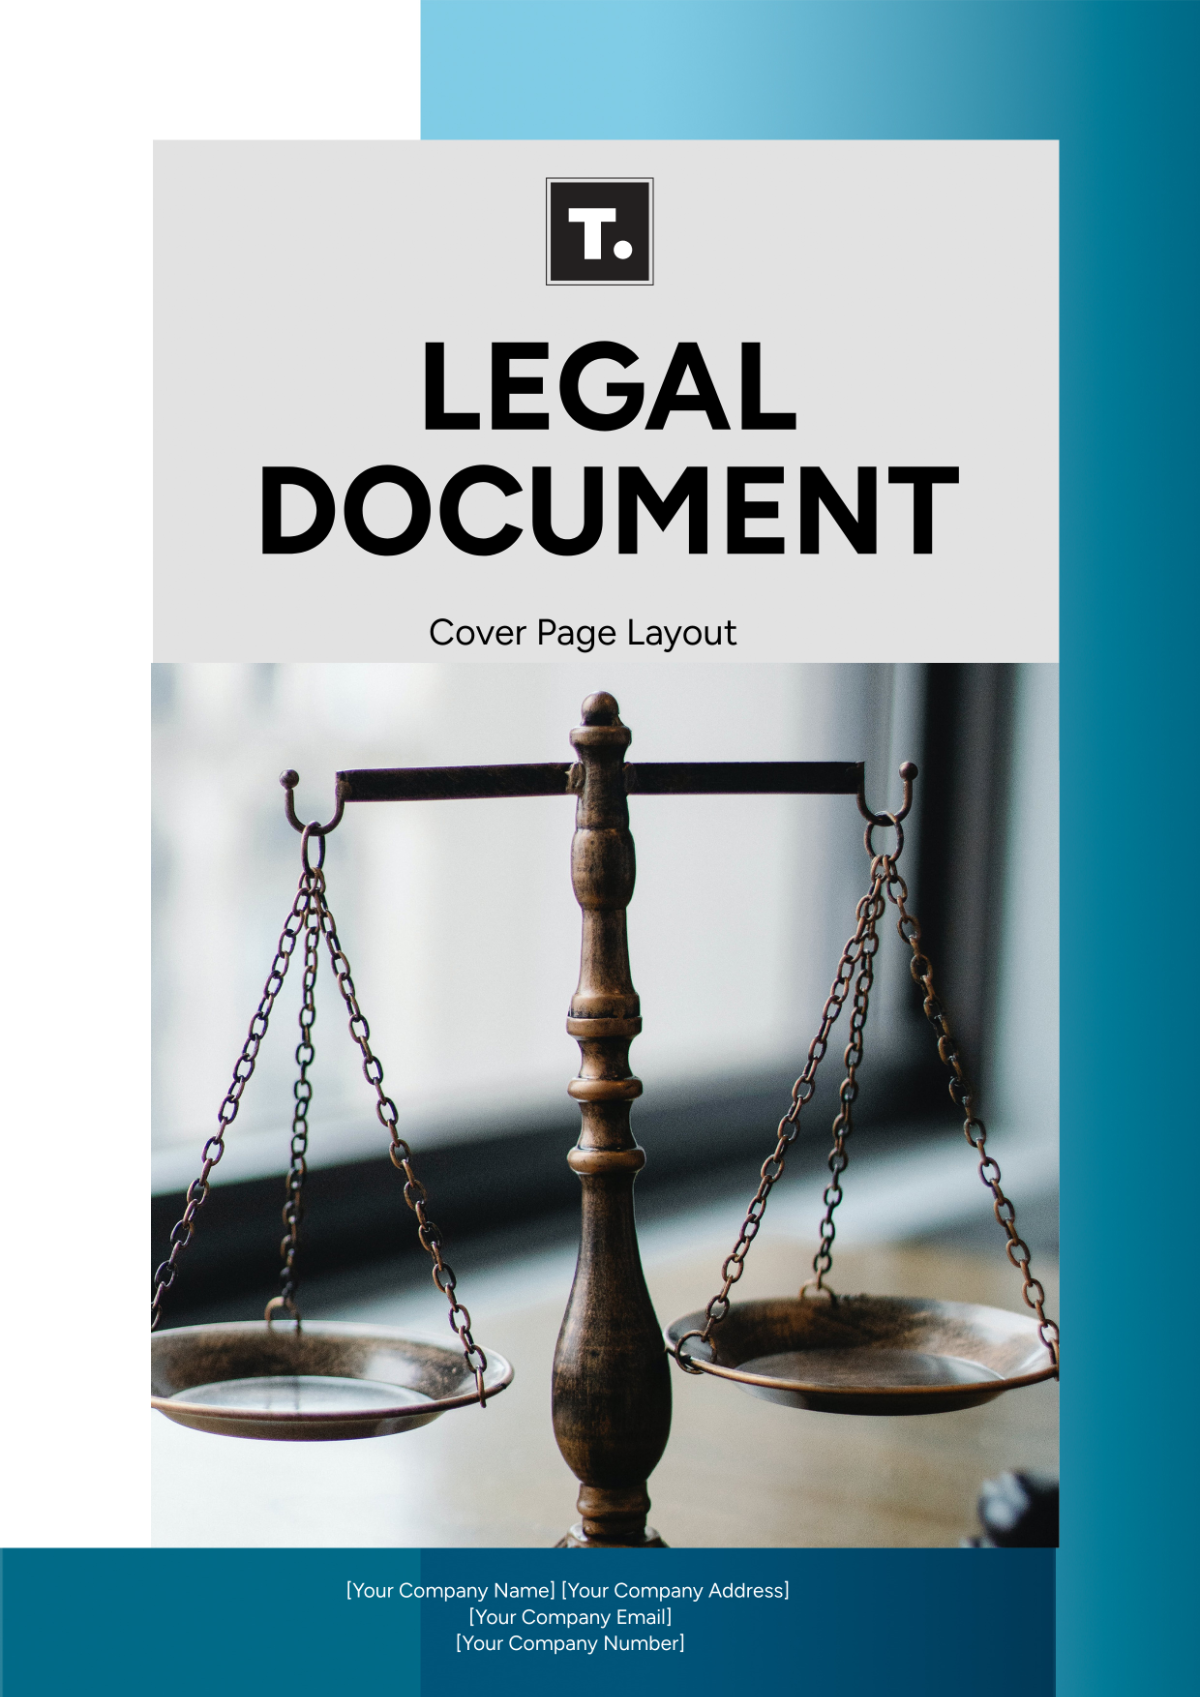 Legal Document Cover Page Layout